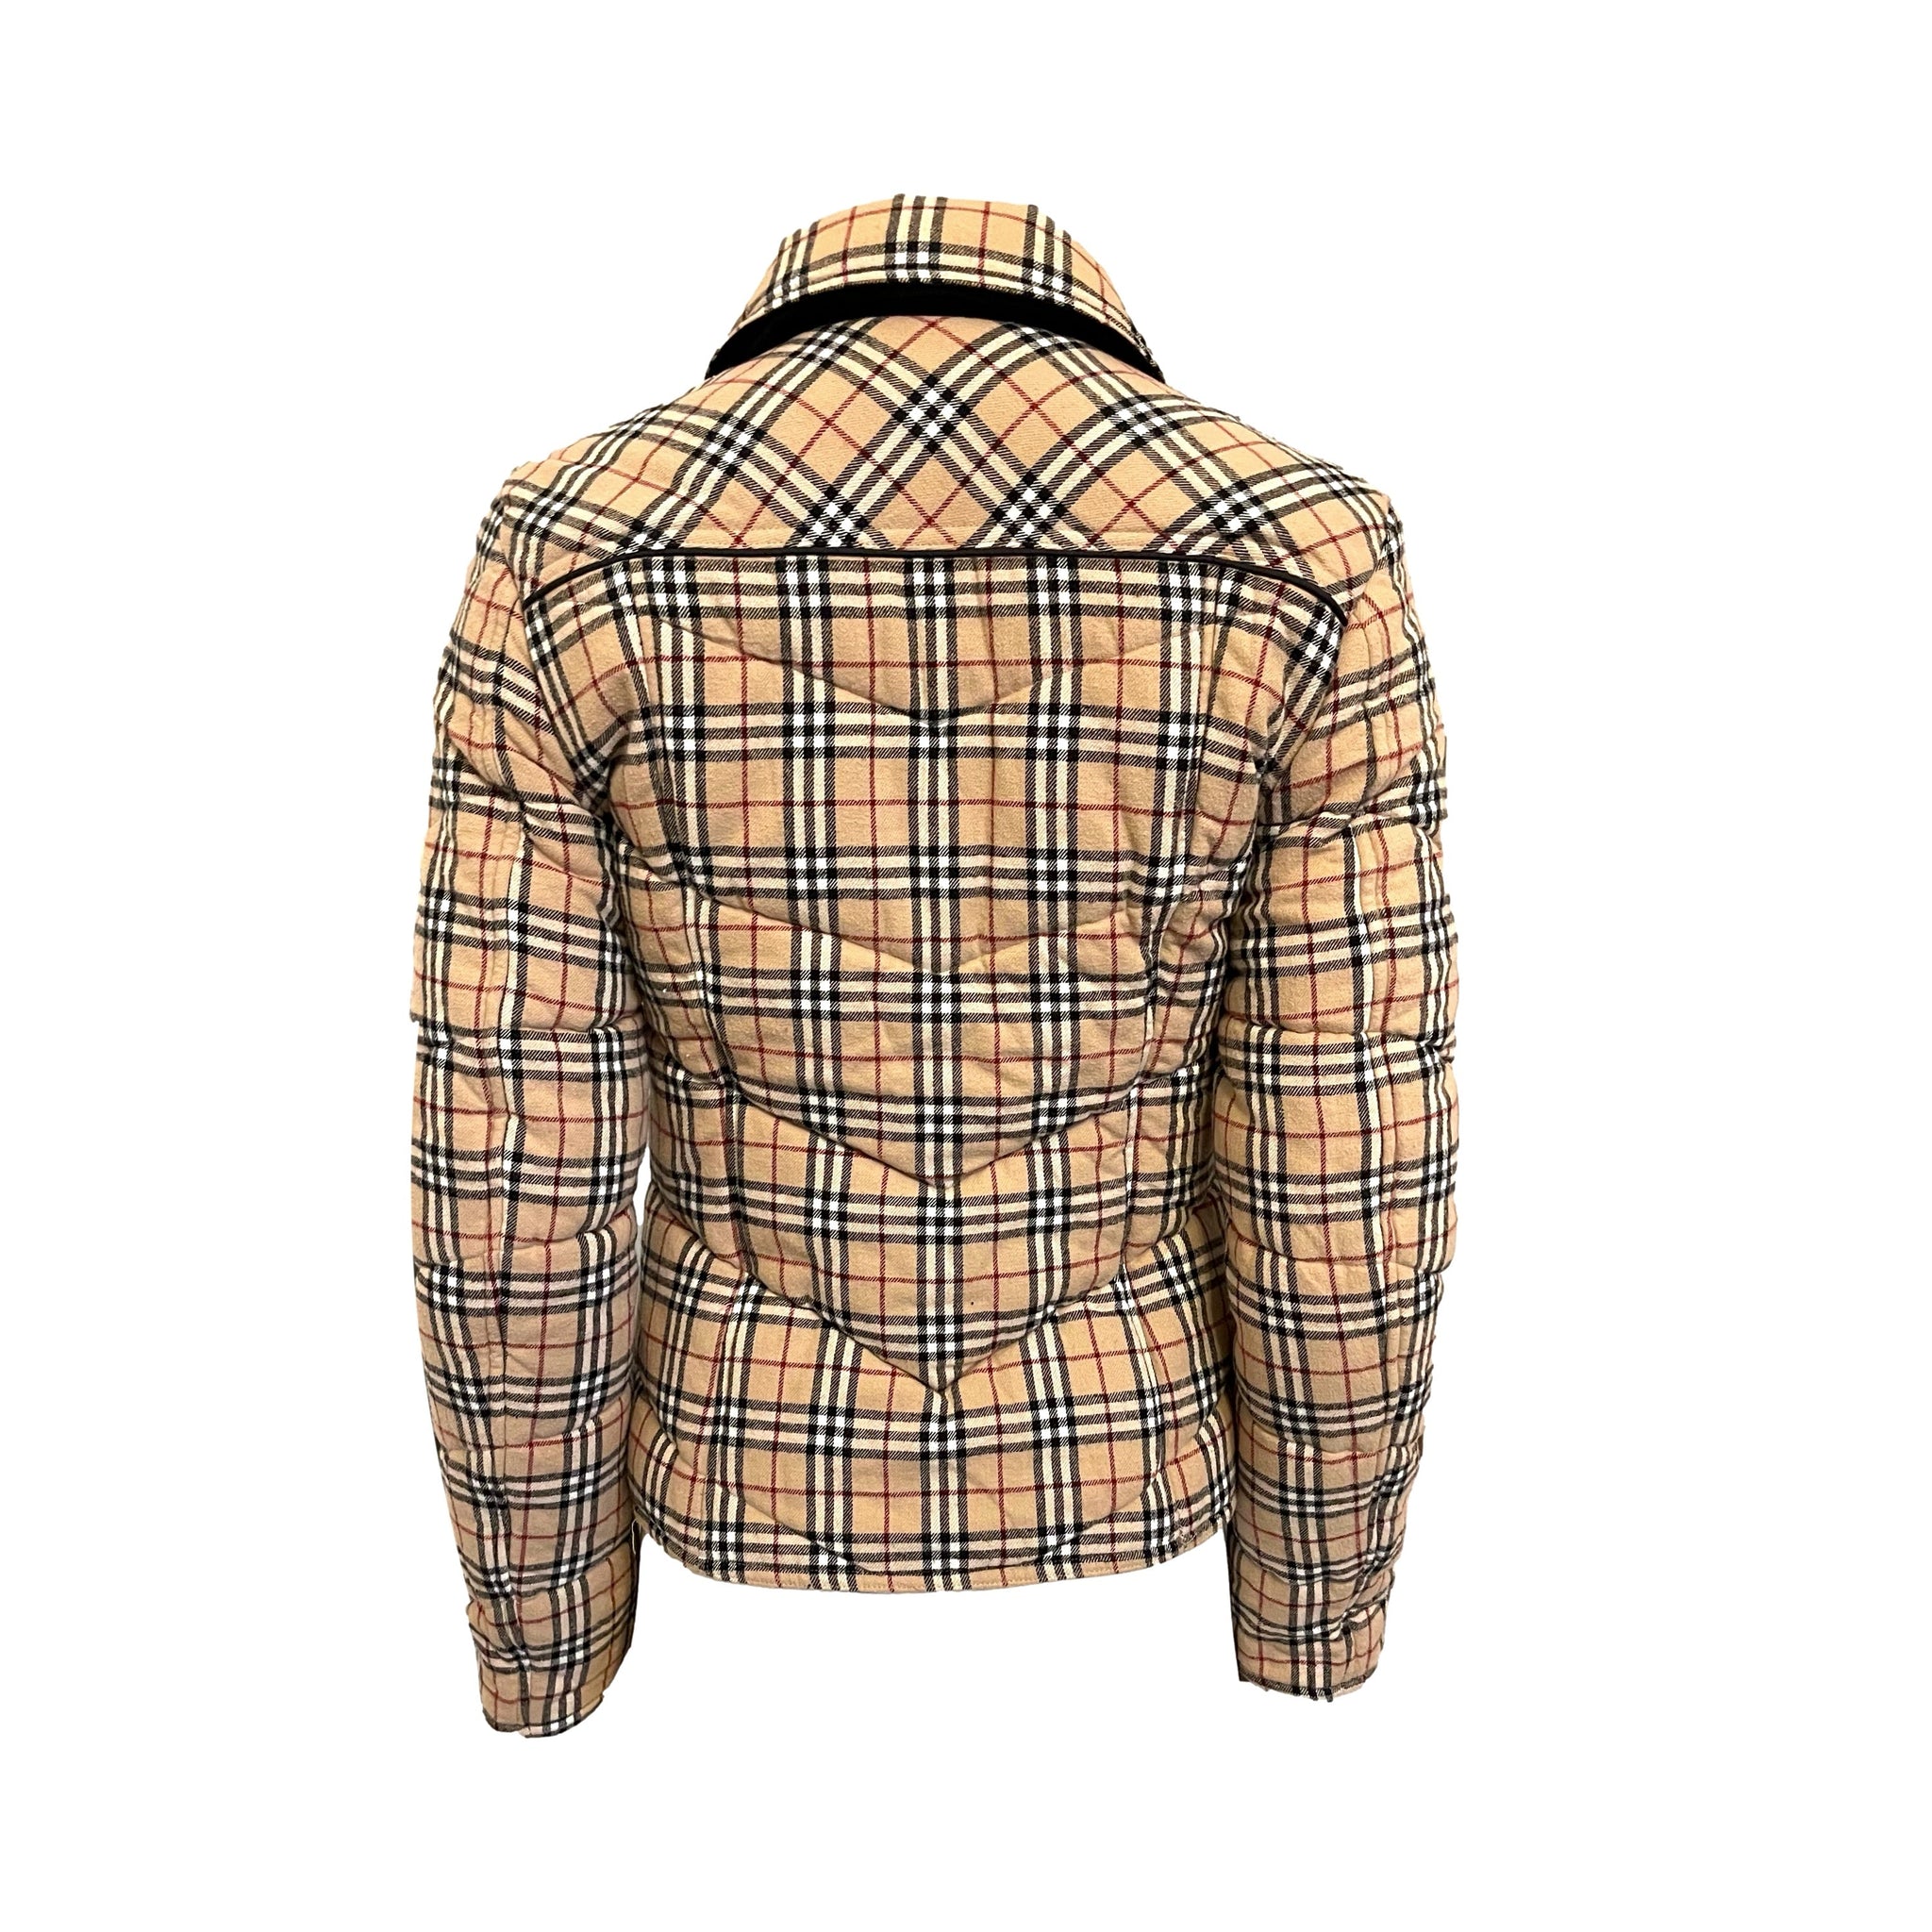 Louis Vuitton Authenticated Gingham Jacket